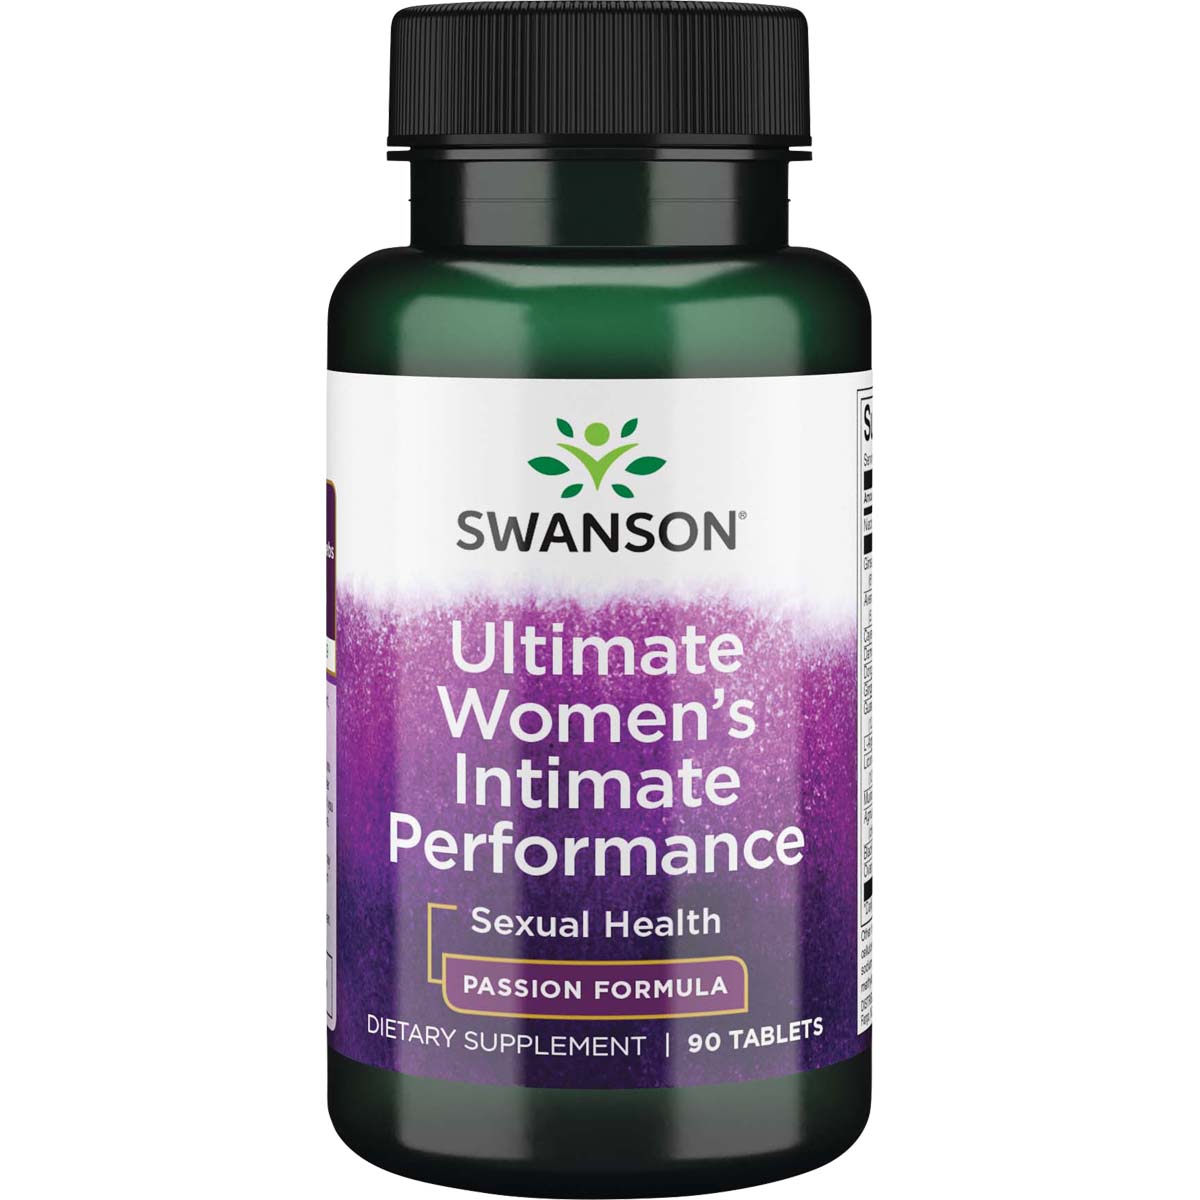 Swanson Ultimate Women's Intimate Performance, 90 Tablets